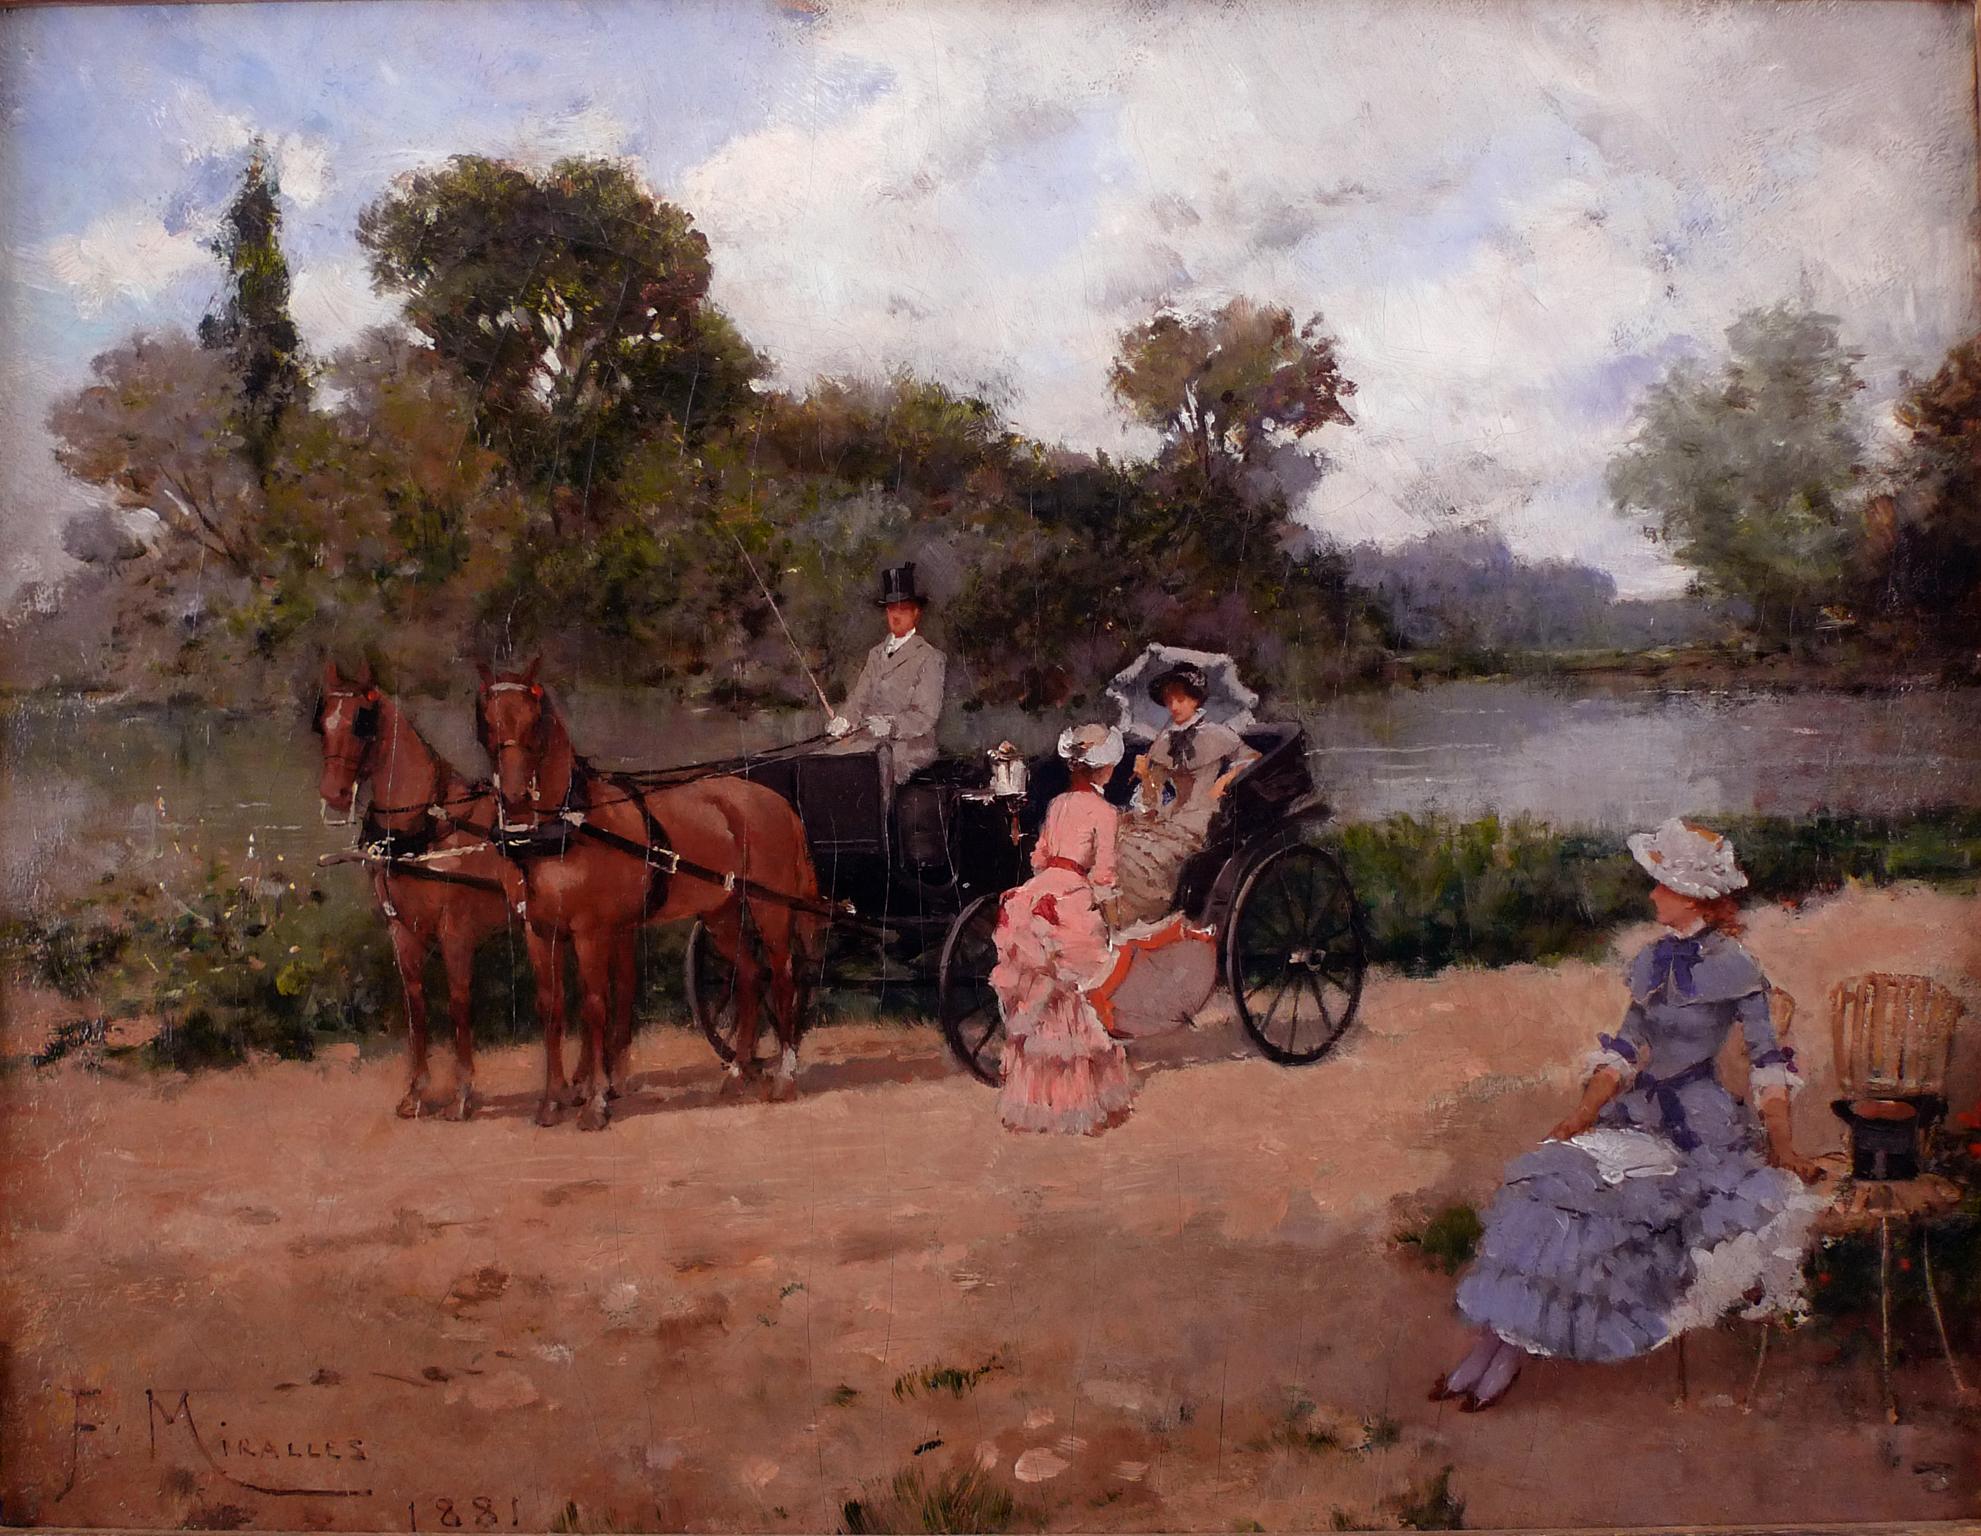 Francisco Miralles y Galup Landscape Painting - "Carriage Ride by The River", 19th Century Oil on Canvas by Francisco Miralles 